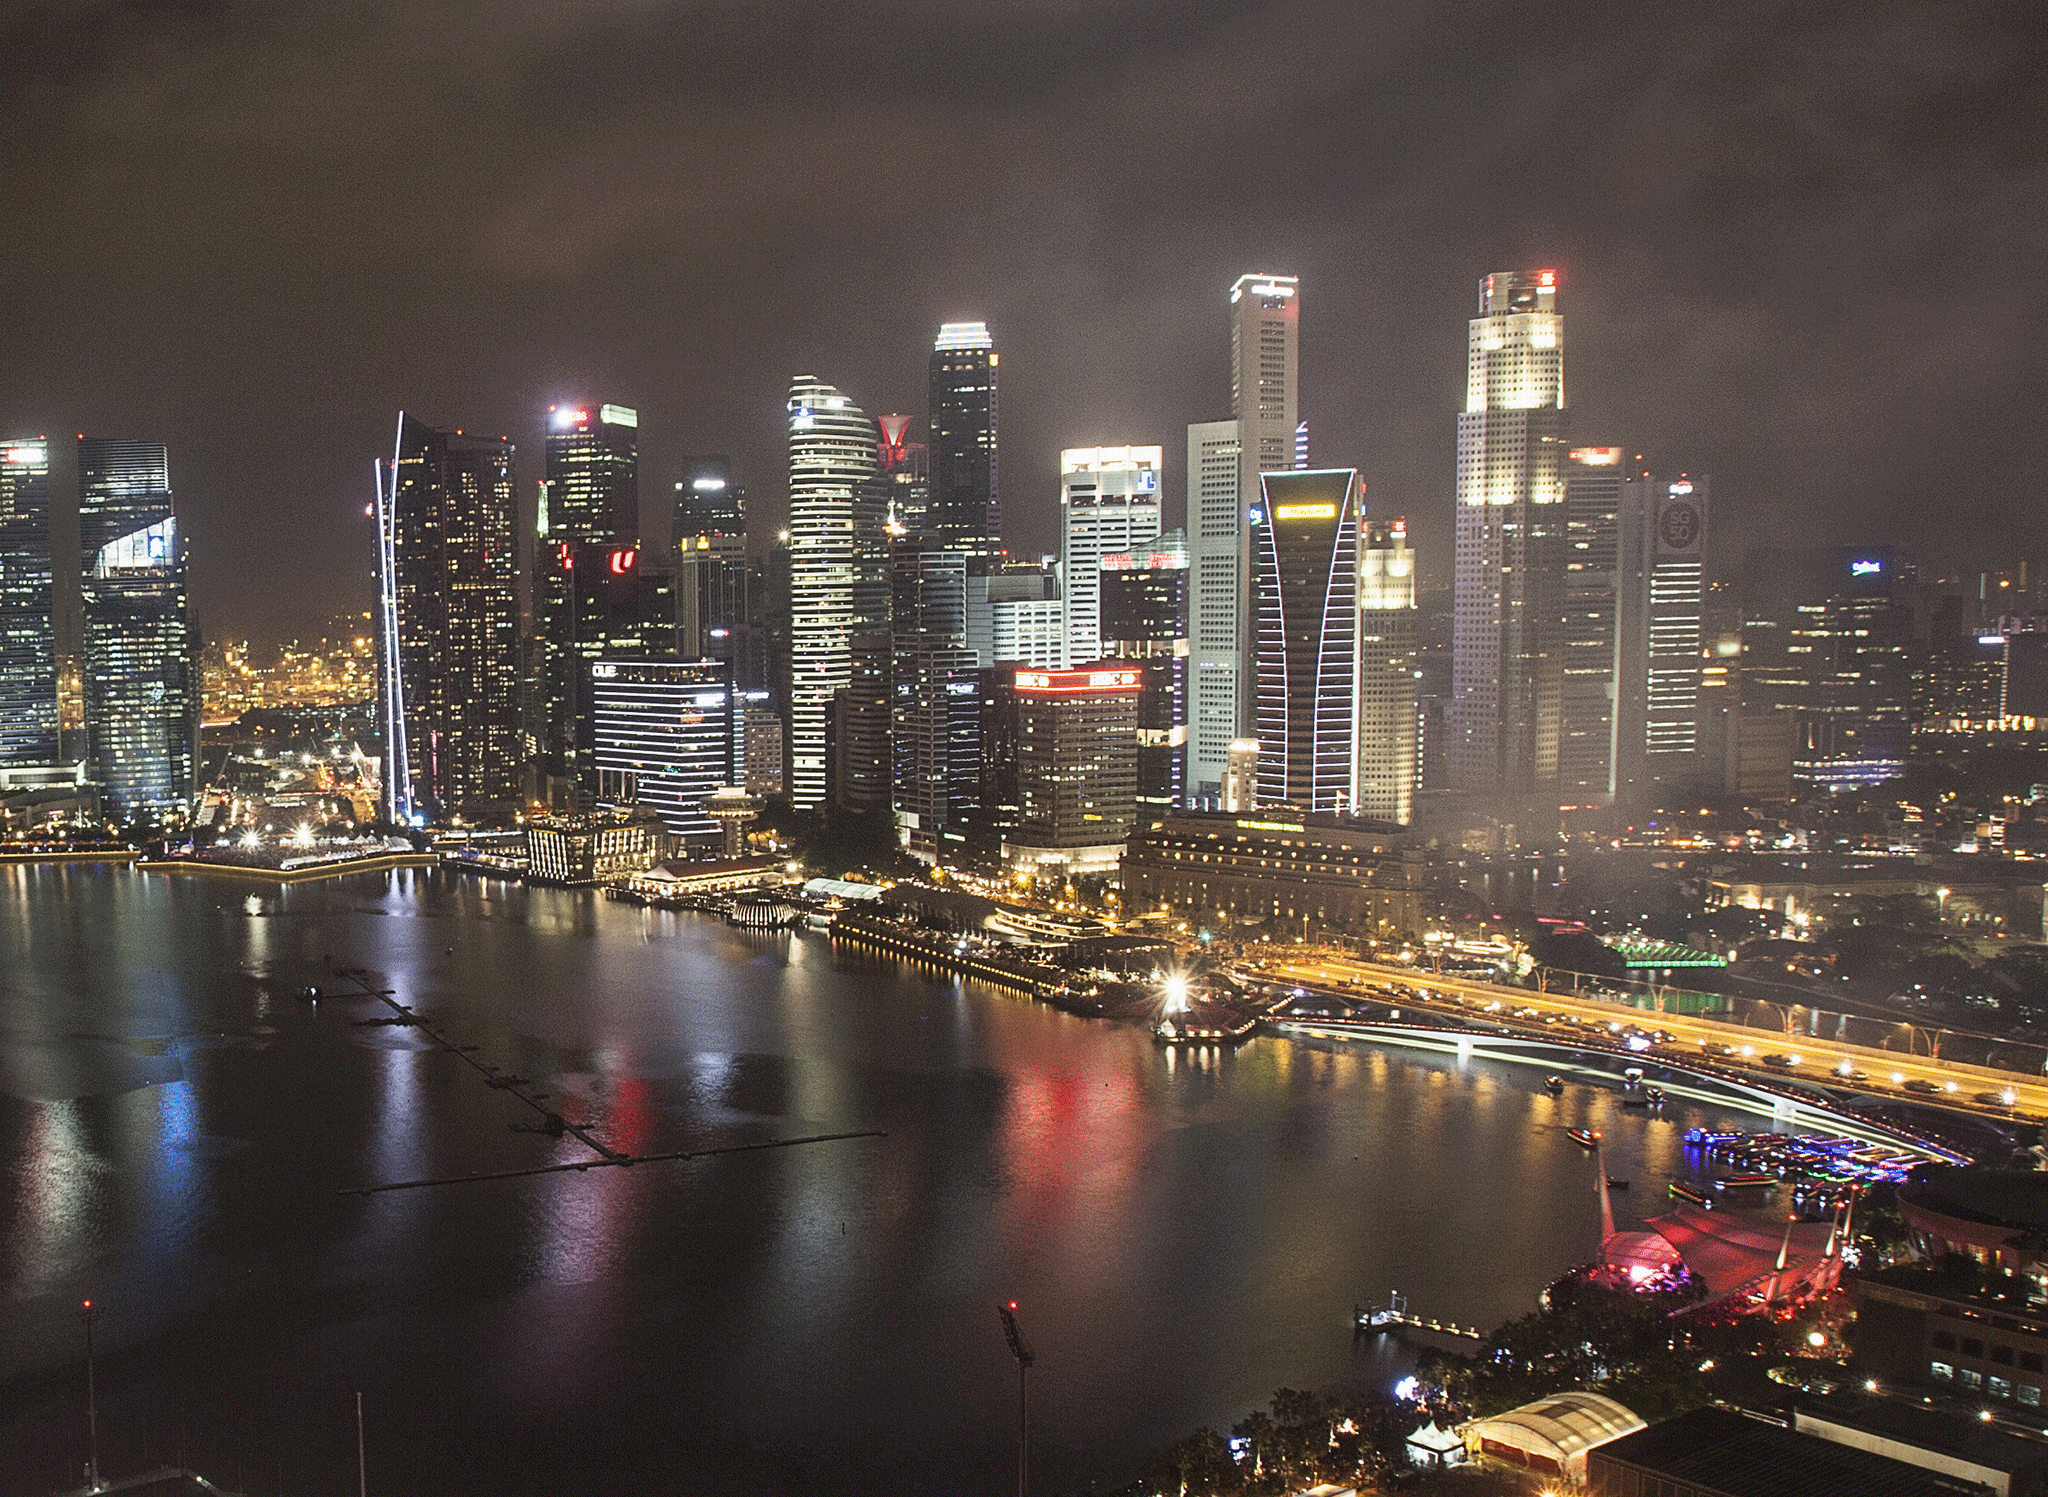 Singapore is touted as a model for post-Brexit Britain